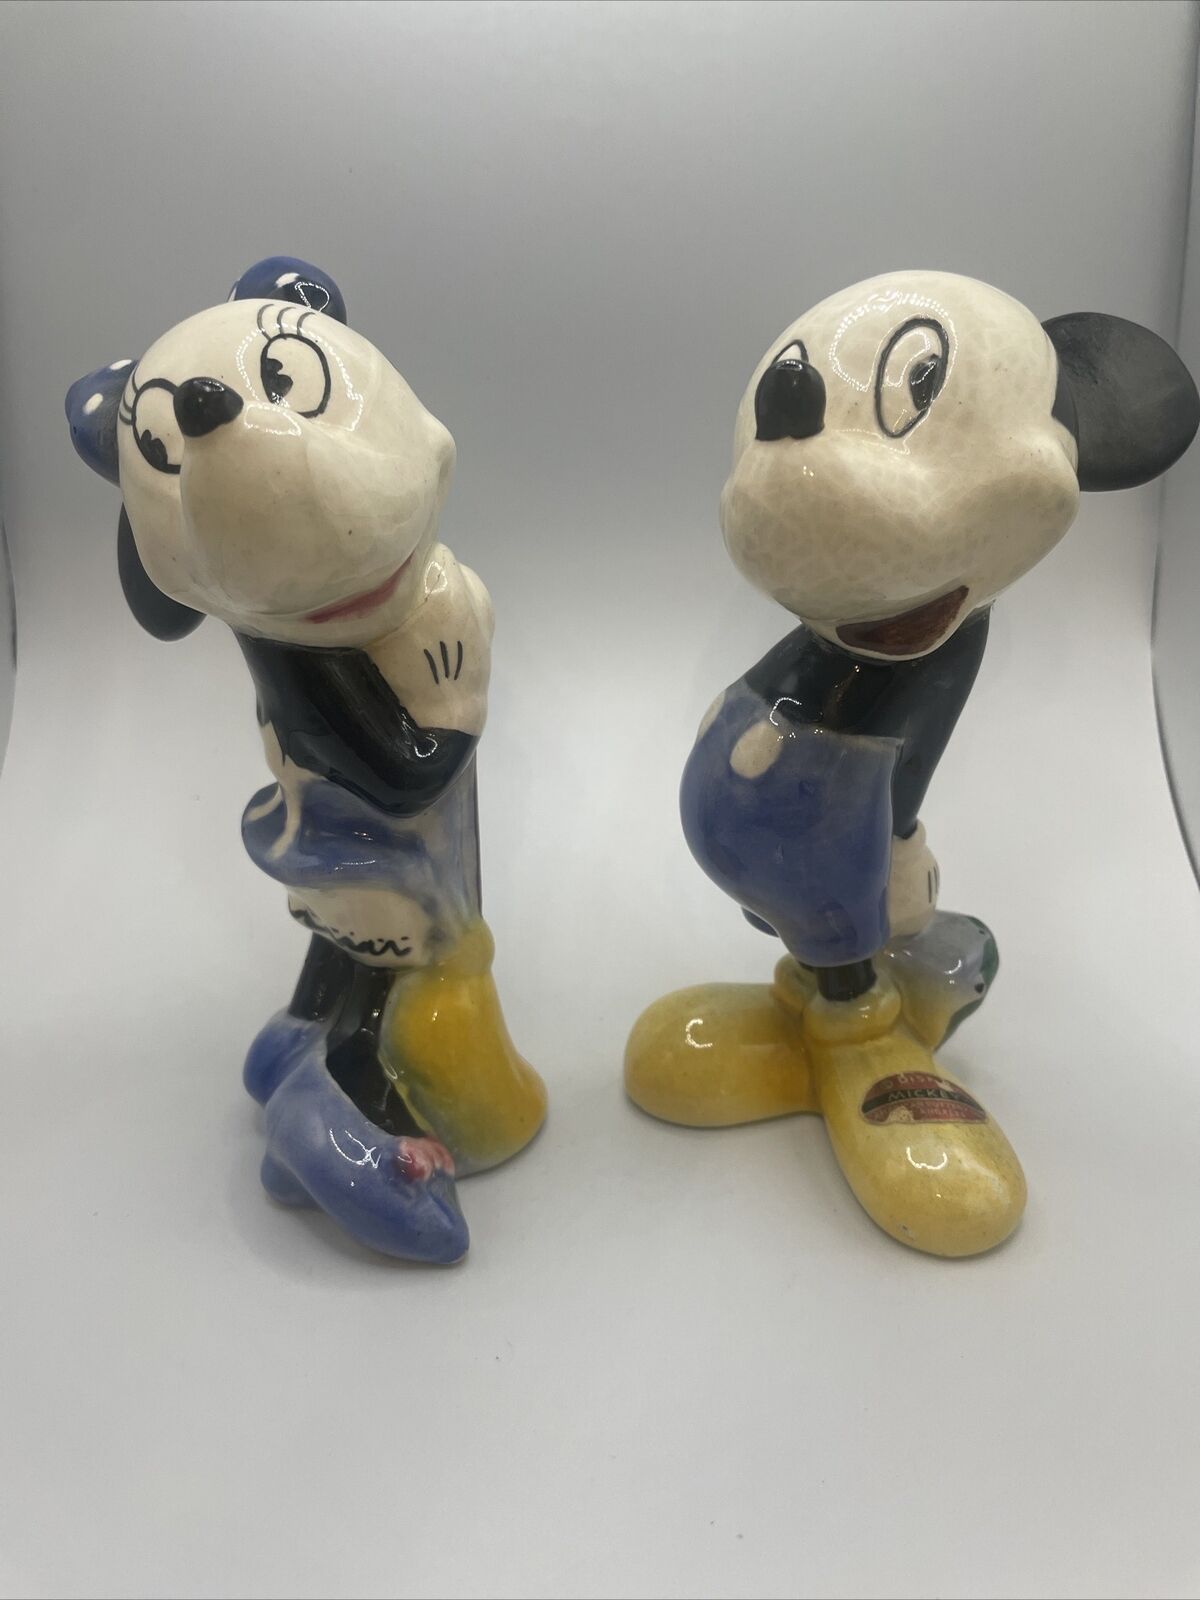 Mickey & Minnie Mouse~Ceramic Figurines By American Pottery Co. LA Calif. 1940’s